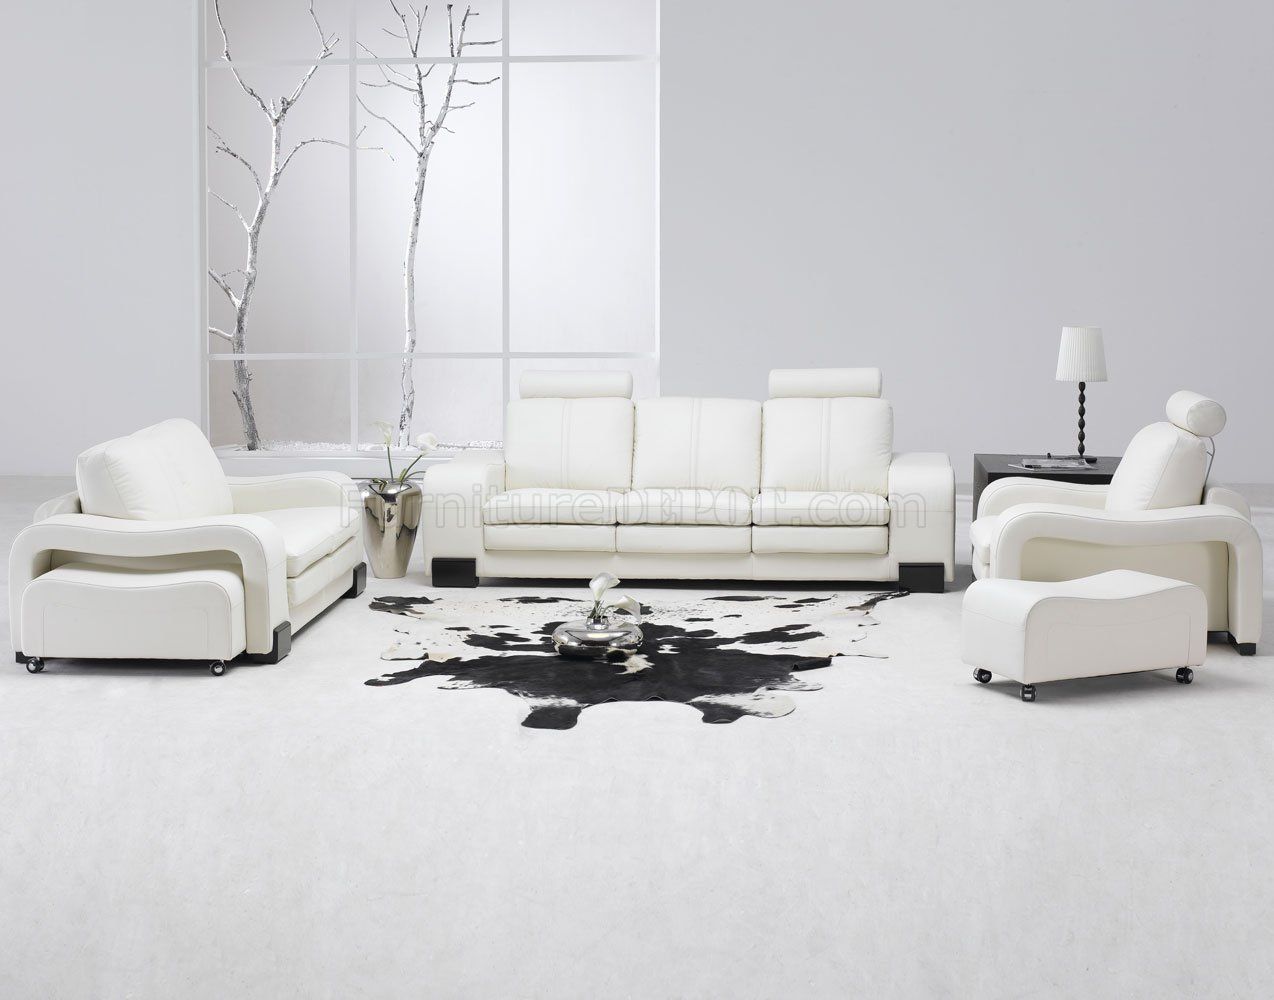 White Leather 4pc Modern Sofa, Loveseat, Chair & Couch With Regard To 4pc Beckett Contemporary Sectional Sofas And Ottoman Sets (View 9 of 15)